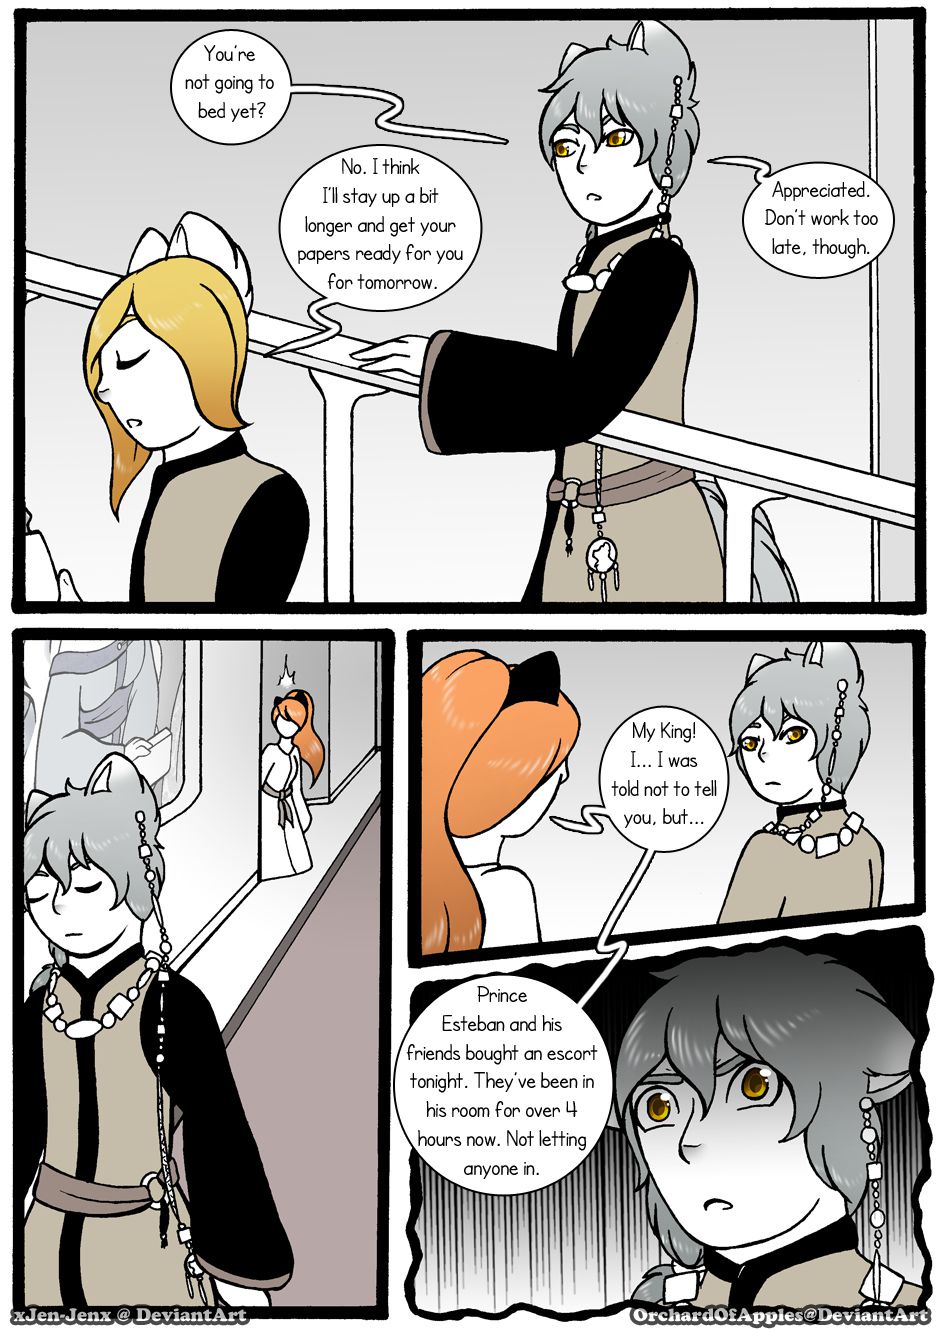 [Jeny-jen94] Between Kings and Queens [Ongoing] 166